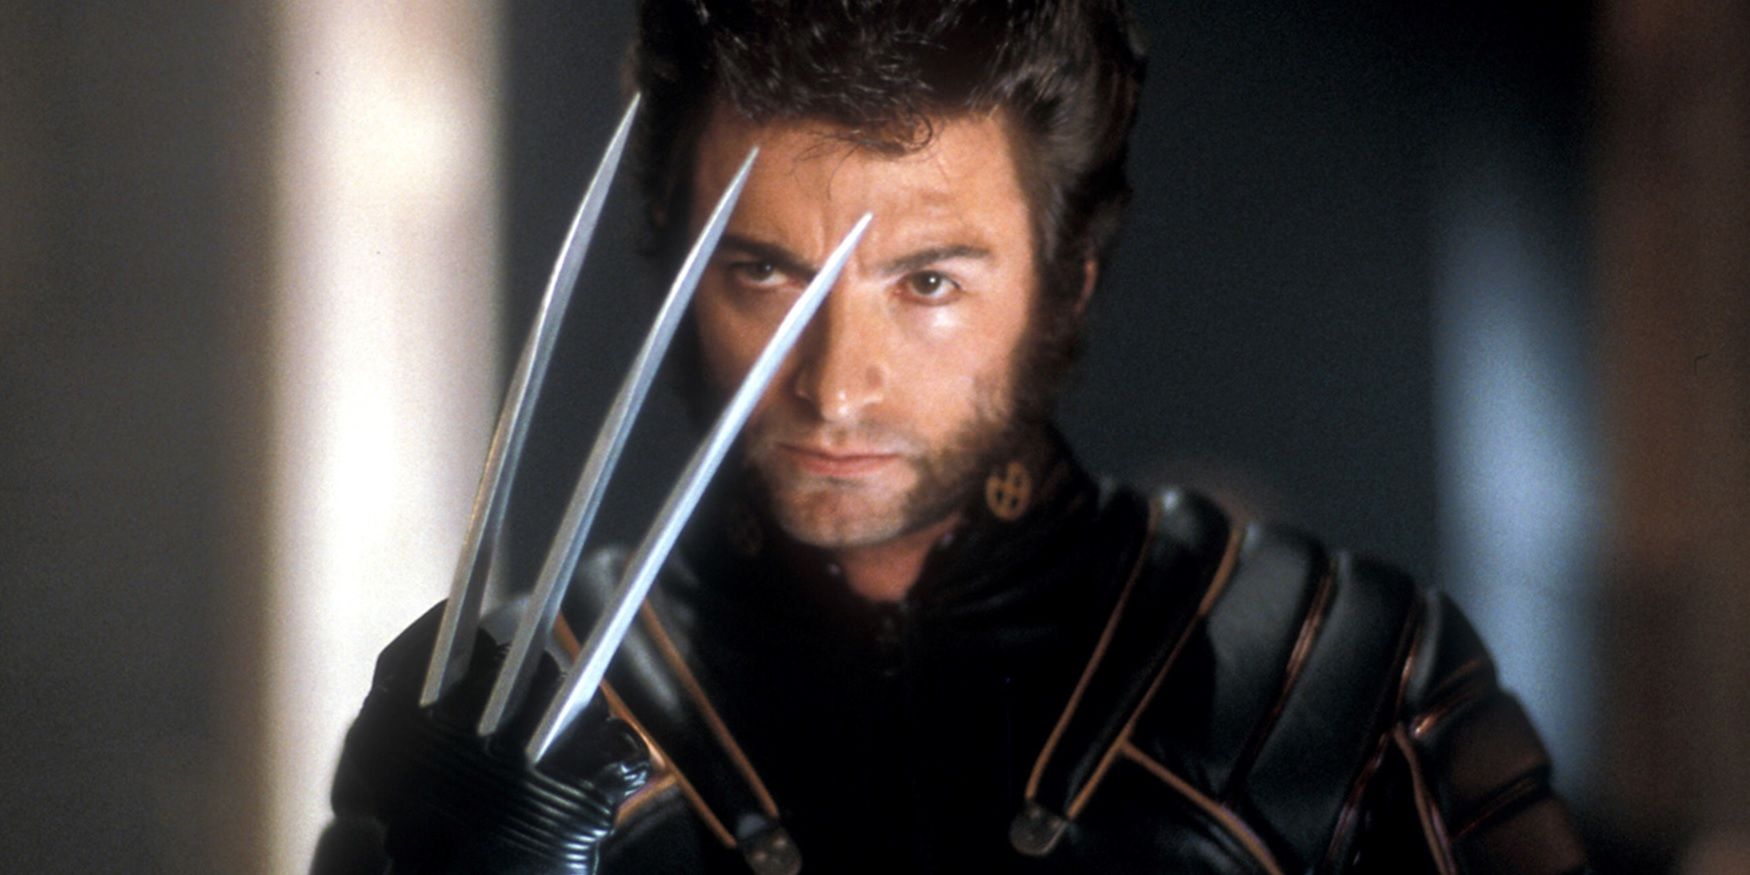 Hugh Jackman as Wolverine with claws out in X-Men